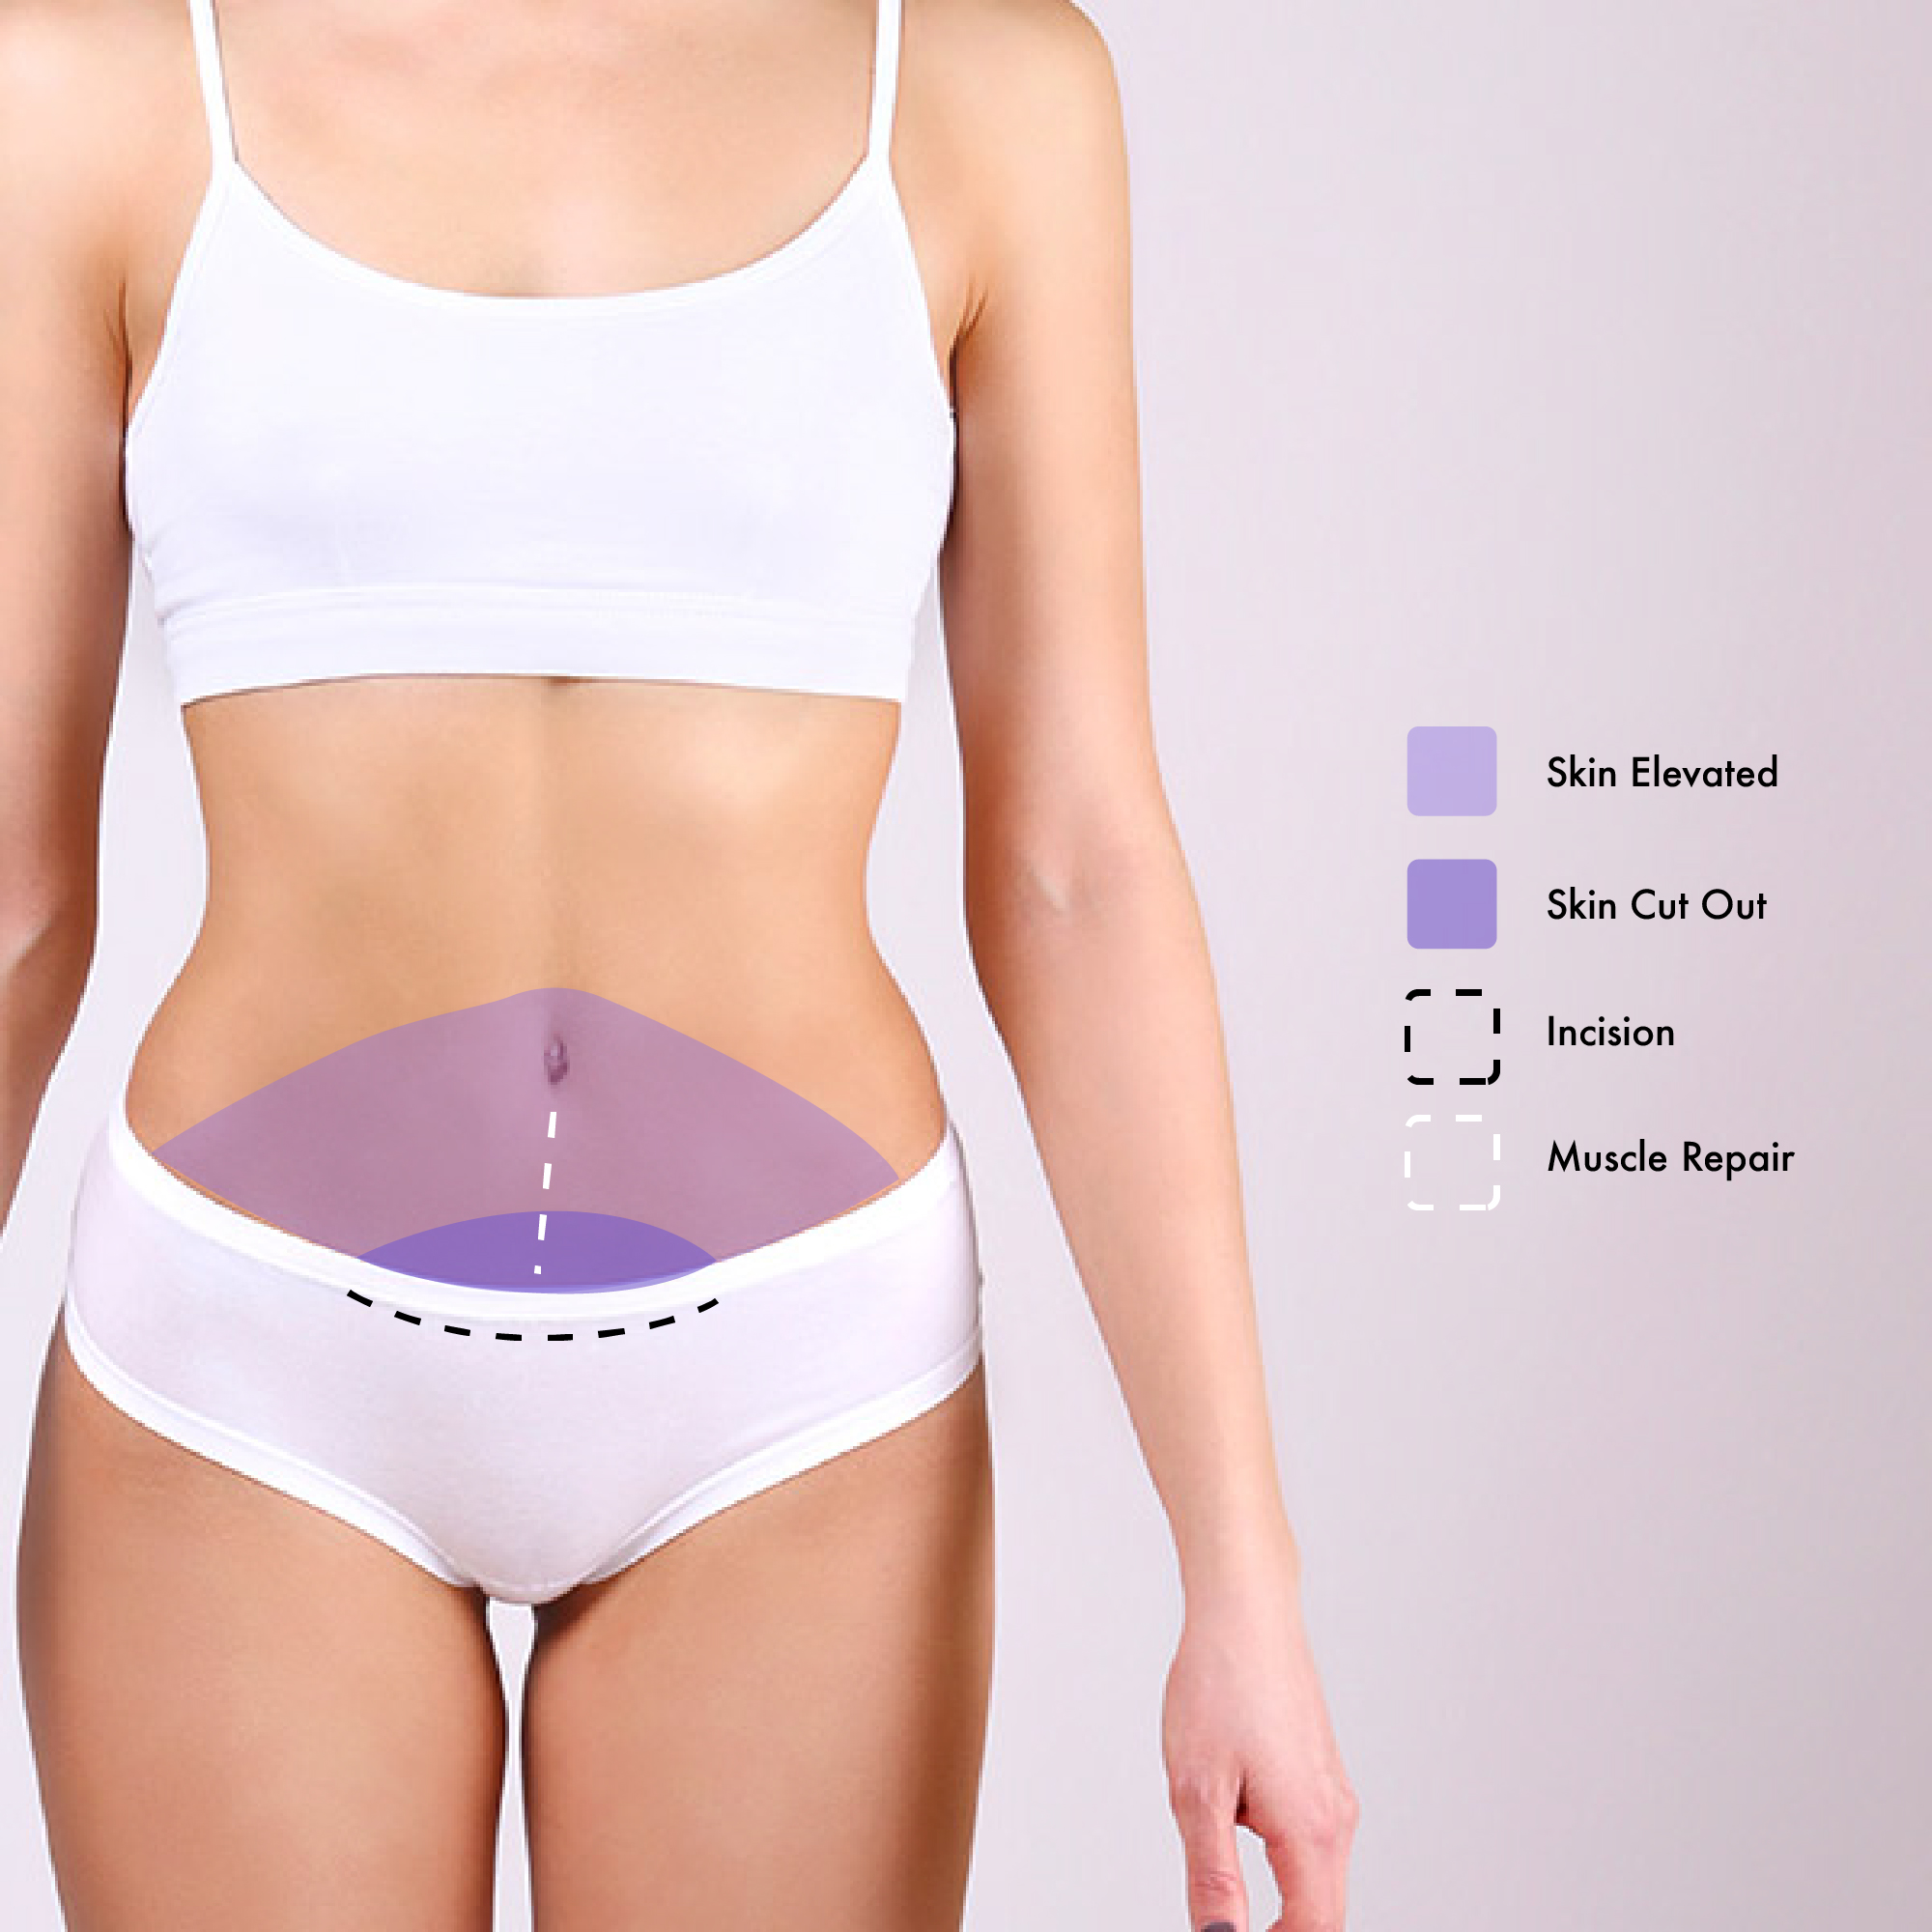 How Much Is A Mini Tummy Tuck?